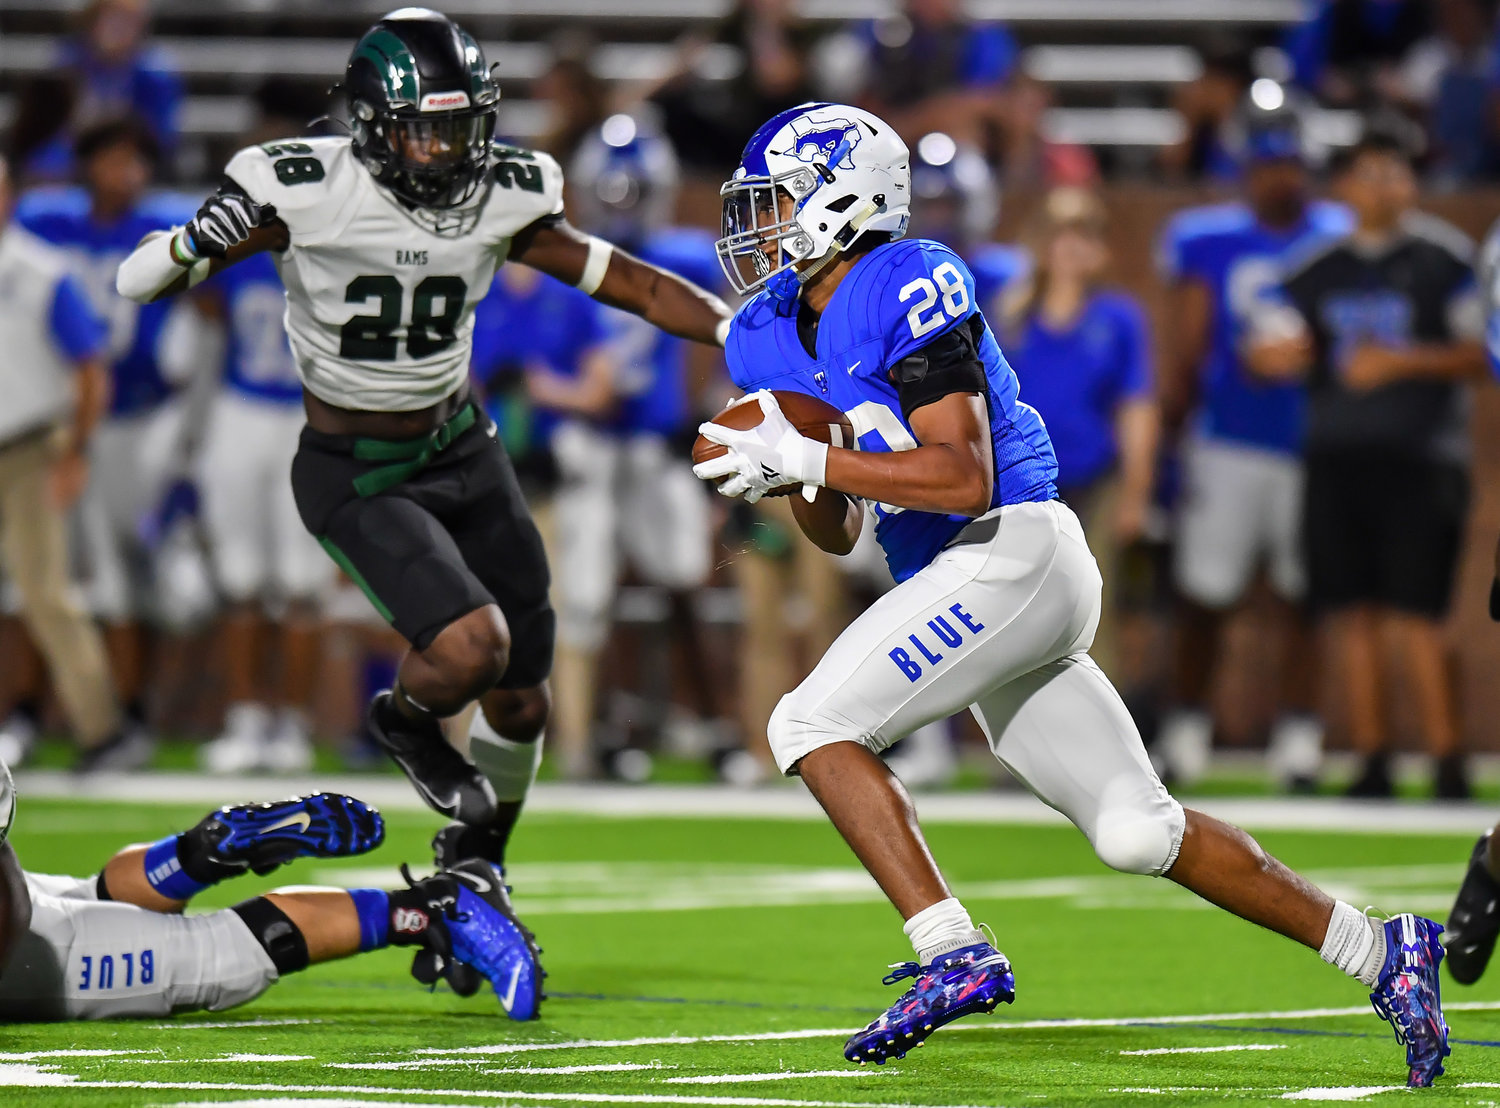 Katy, Tx. Oct 15, 2021: Katy Taylors Tyler Irving #28 carries the ball during a conference game between Mayde Creek and Katy Taylor at Rhodes Stadium. (Photo by Mark Goodman / Katy Times)